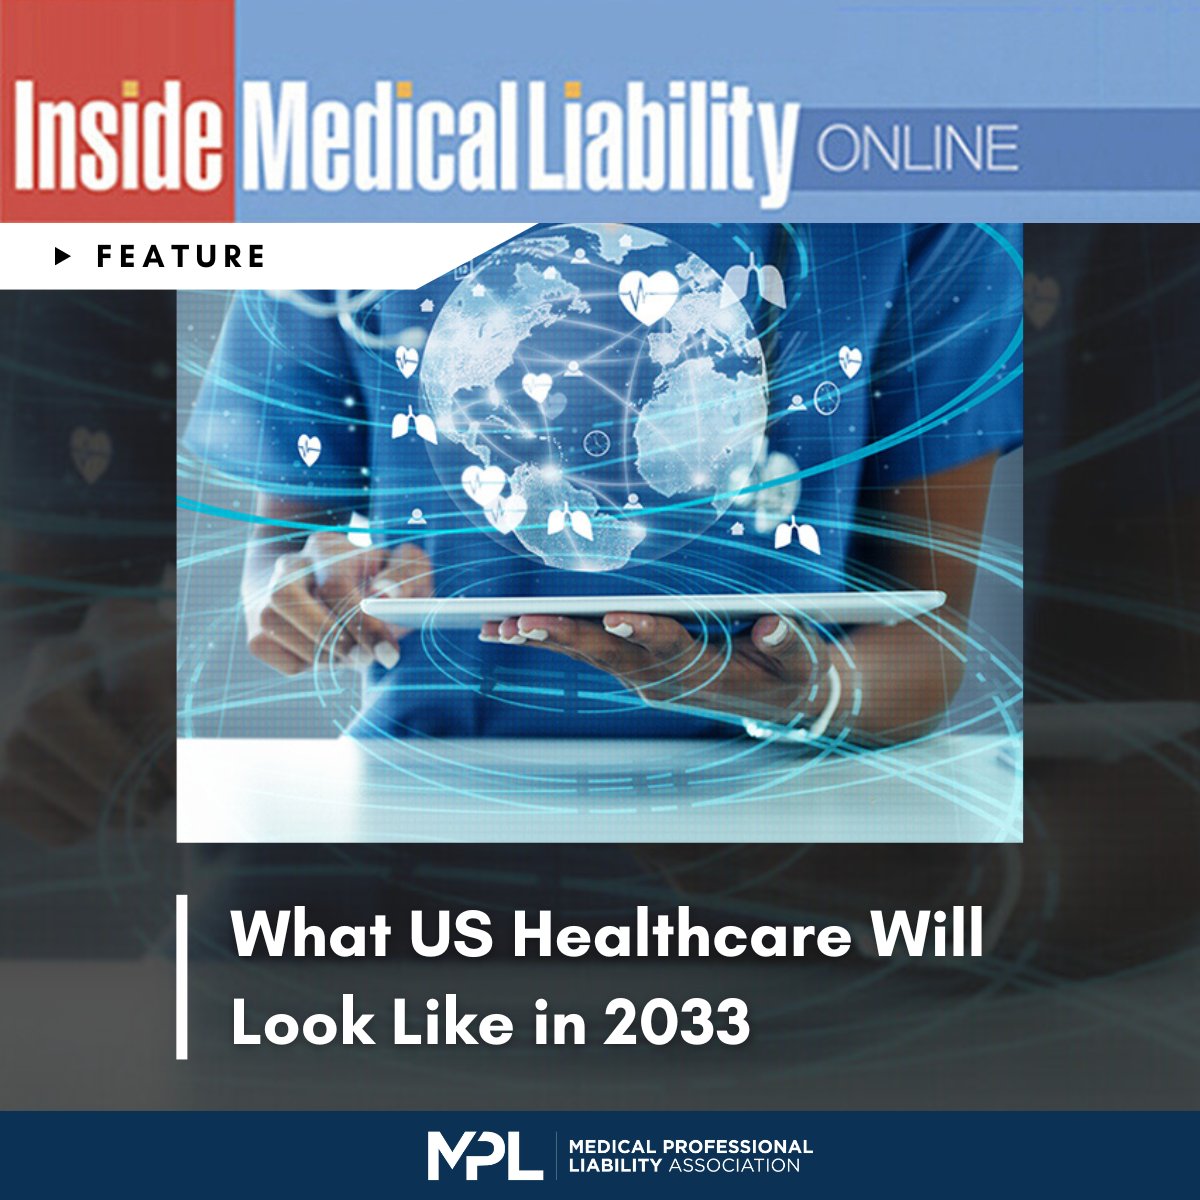 Healthcare faces persistent issues with consolidation, workforce shortages, integration of new technologies, and unrelenting economic pressure. @TDCGrp looks ahead to trends over the next decade, focusing on challenges, key lessons, and emerging risks. bit.ly/3xagAq5